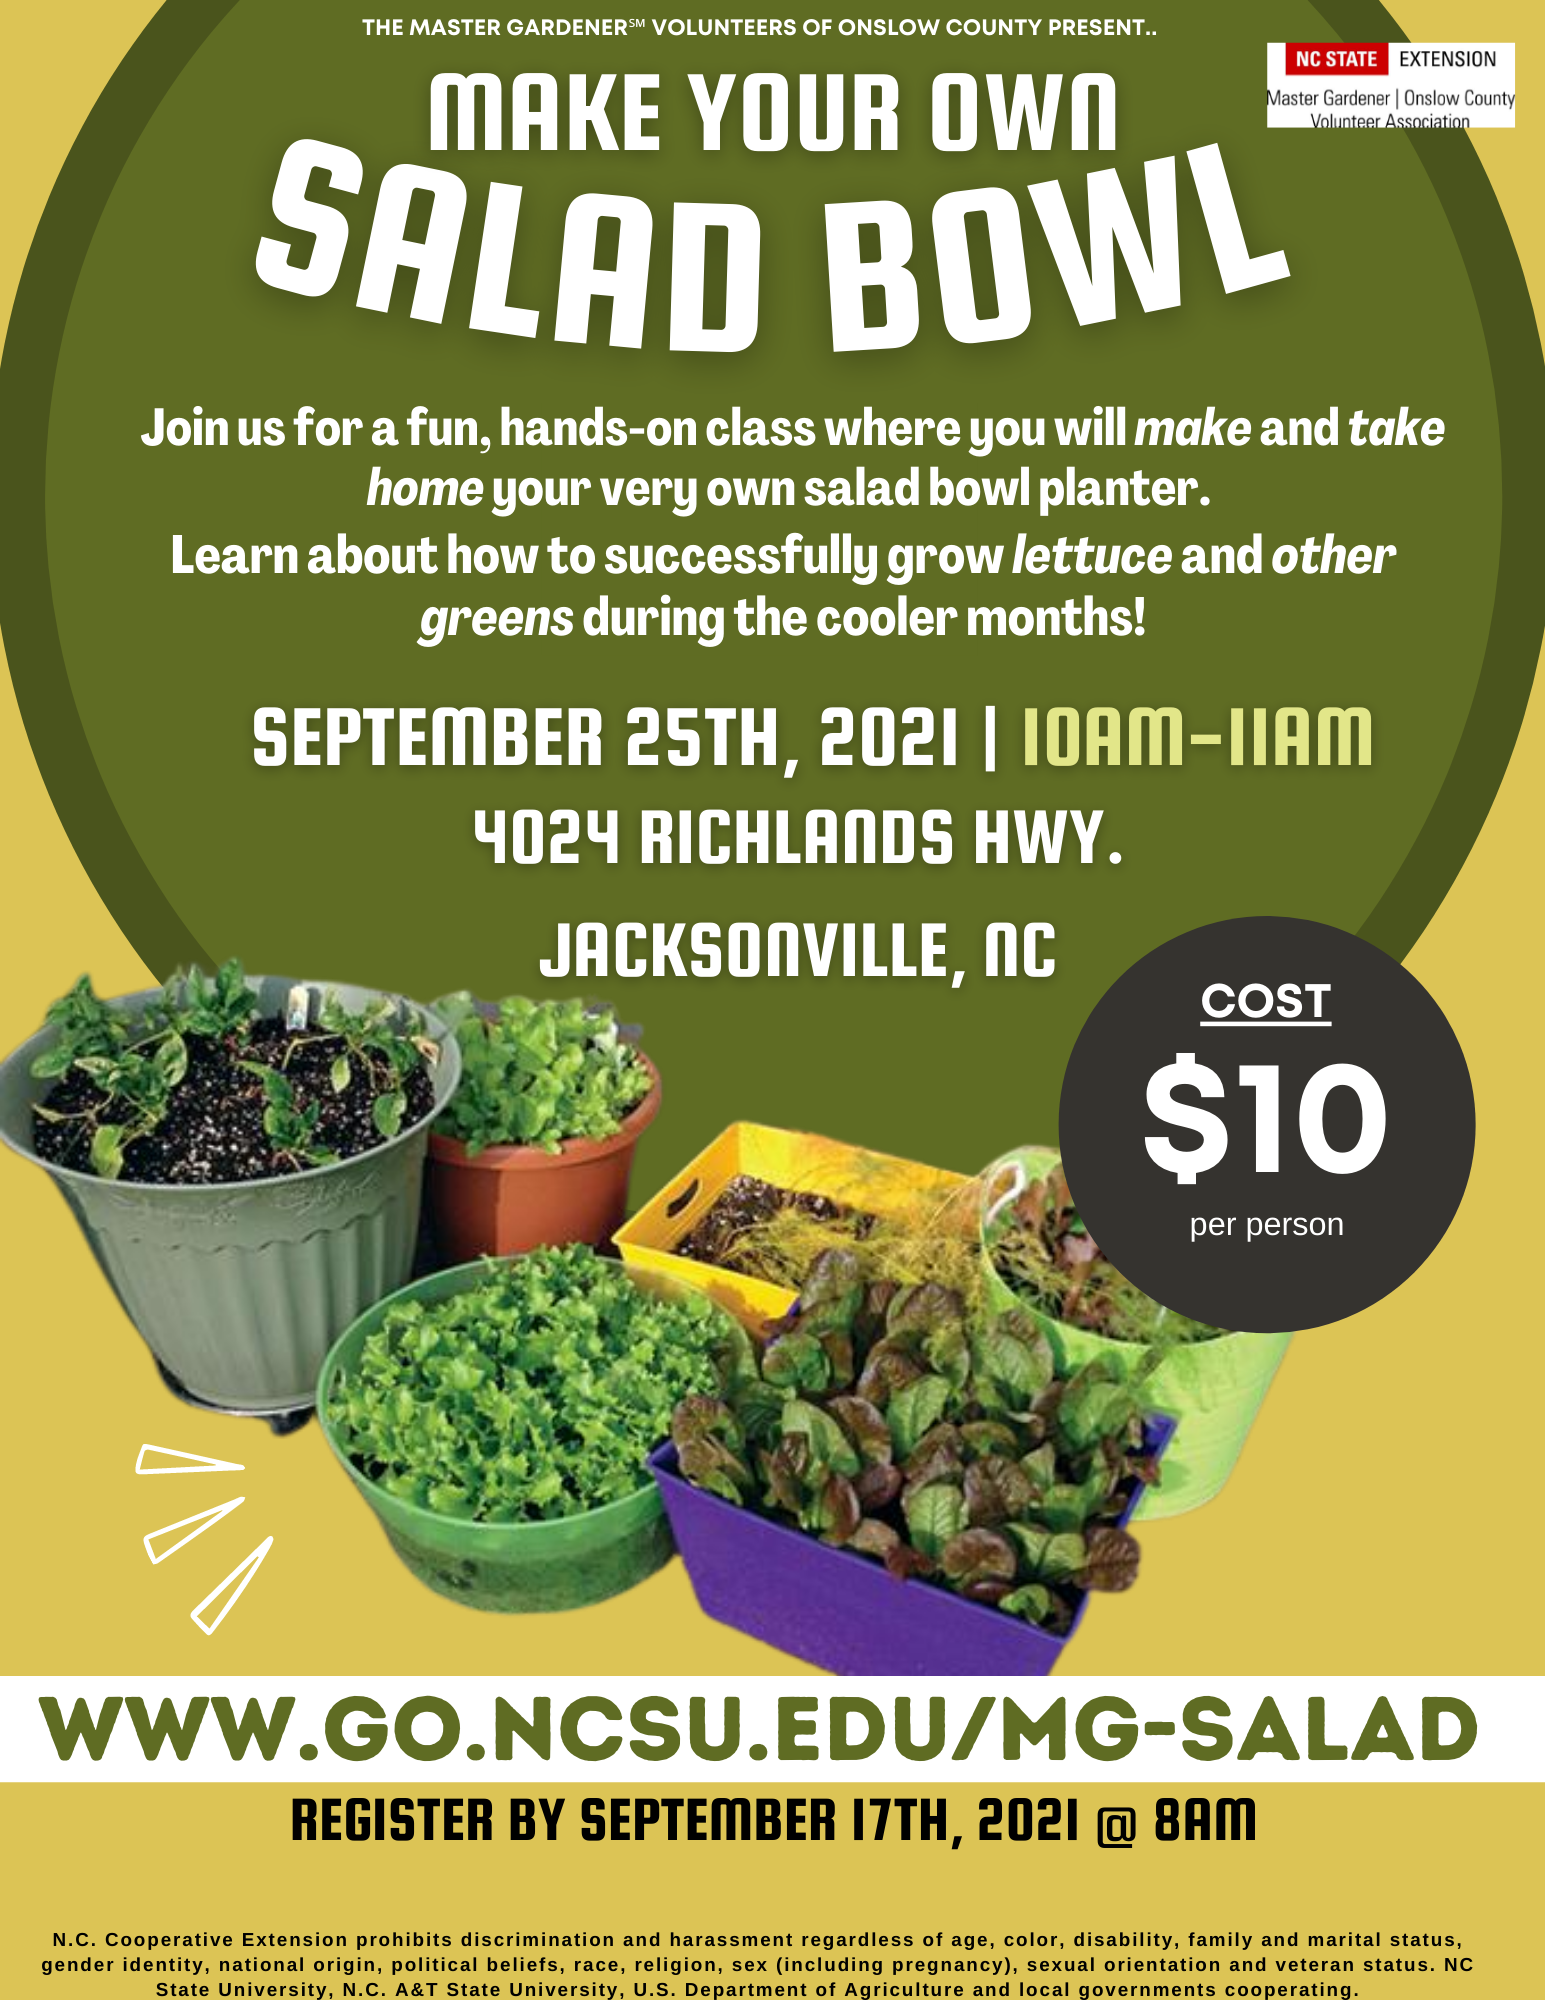 Make Your Own Salad Bowl (Fall Garden Festival 2021) Extension Marketing and Communications photo